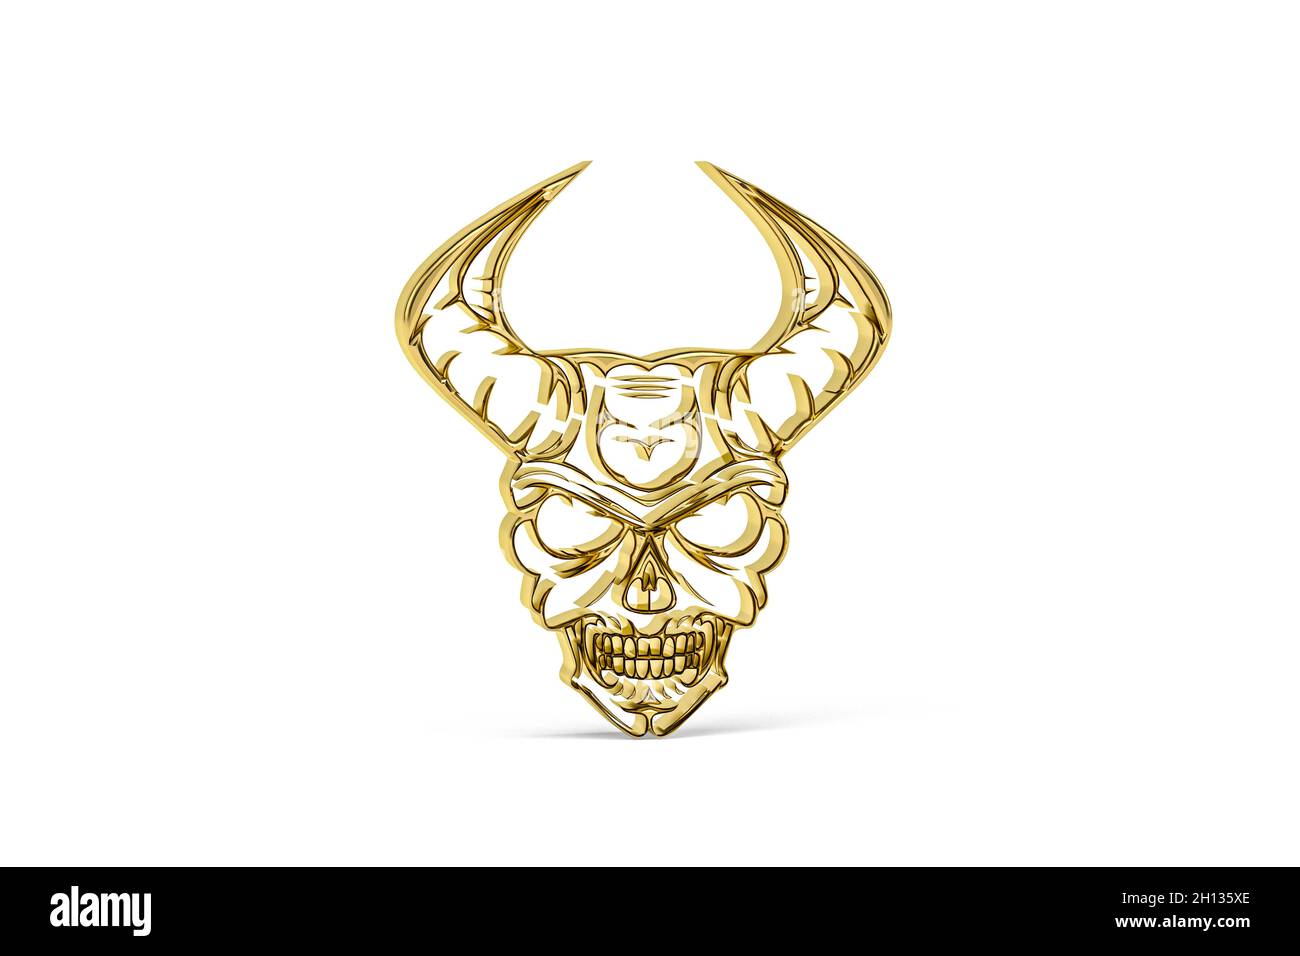 Golden devil icon isolated on white background - 3D render Stock Photo